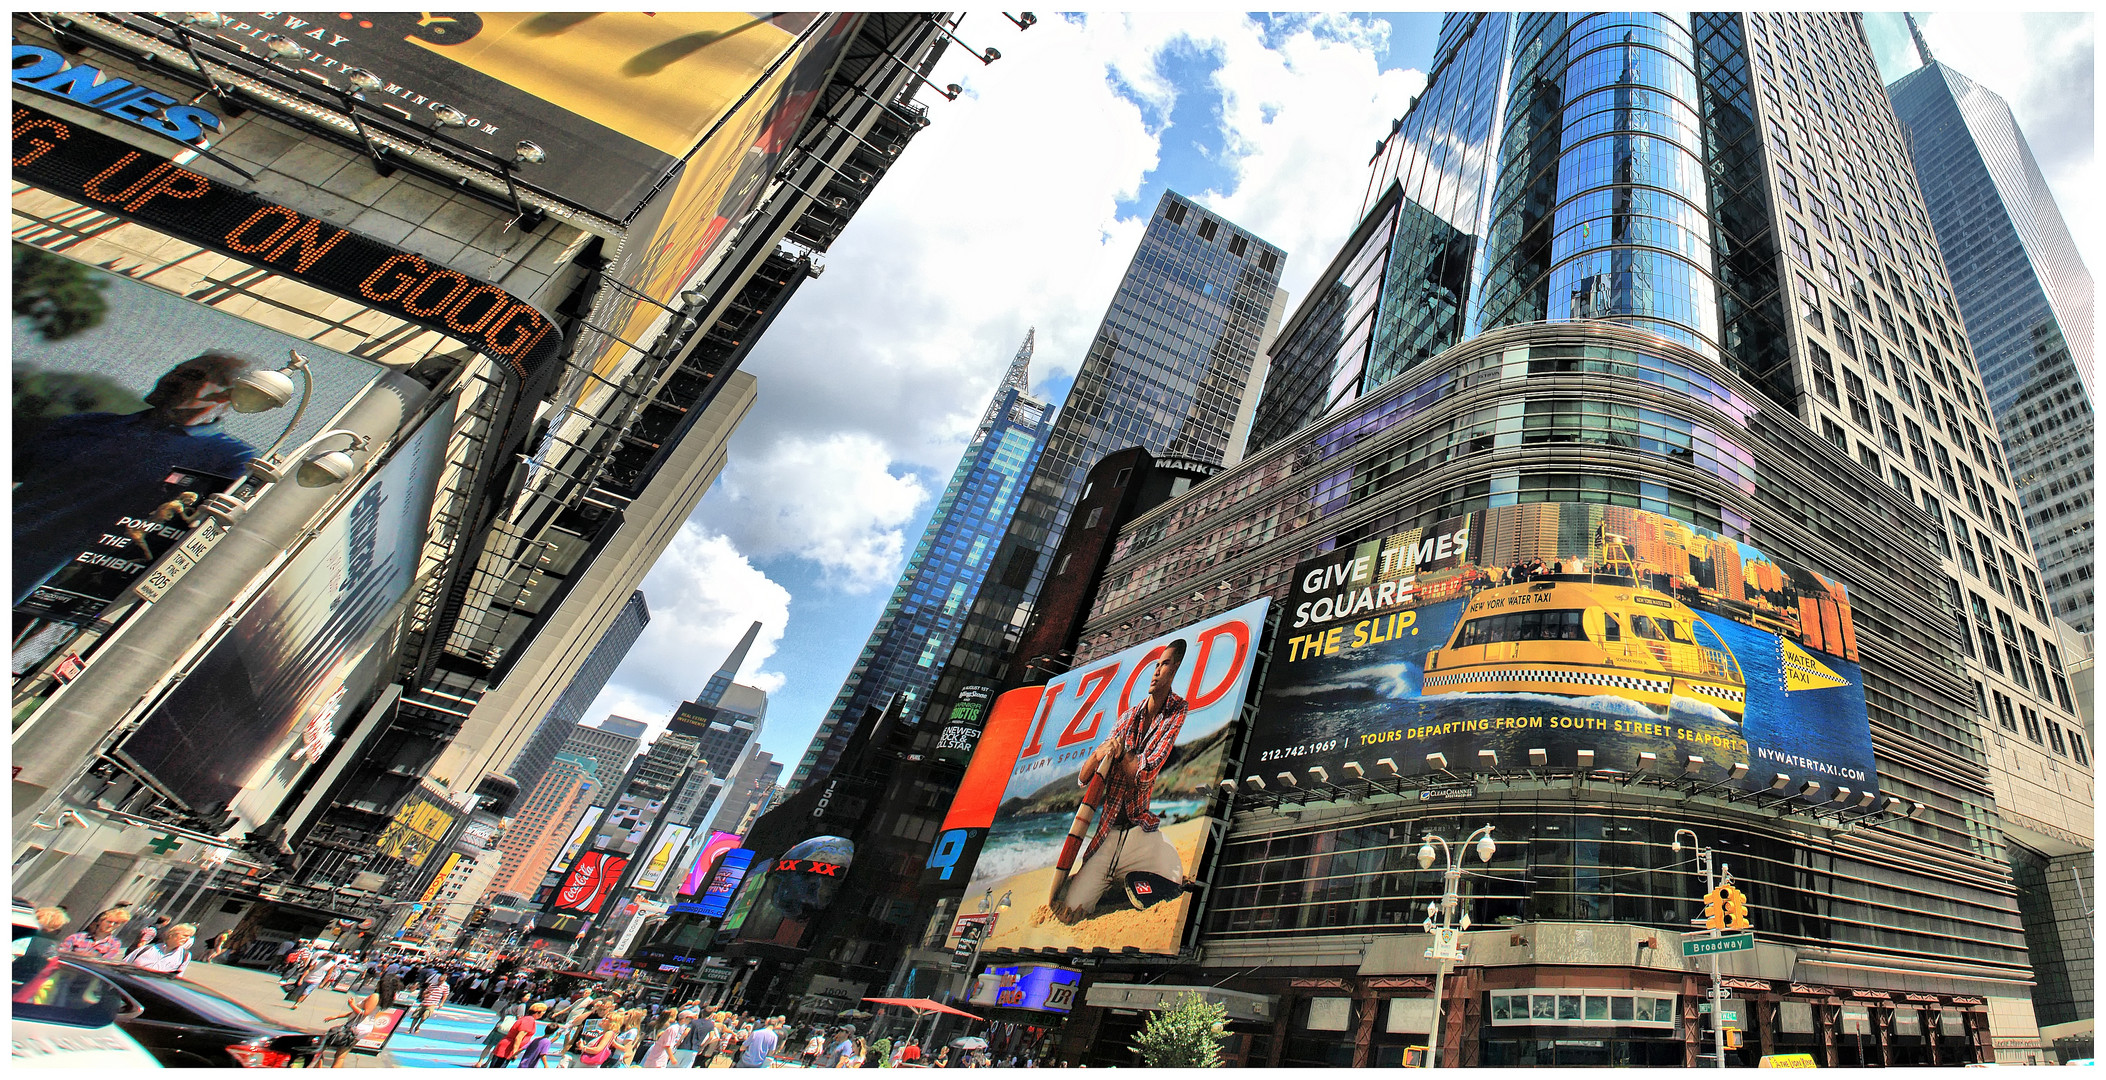 Times Square mal anders ...